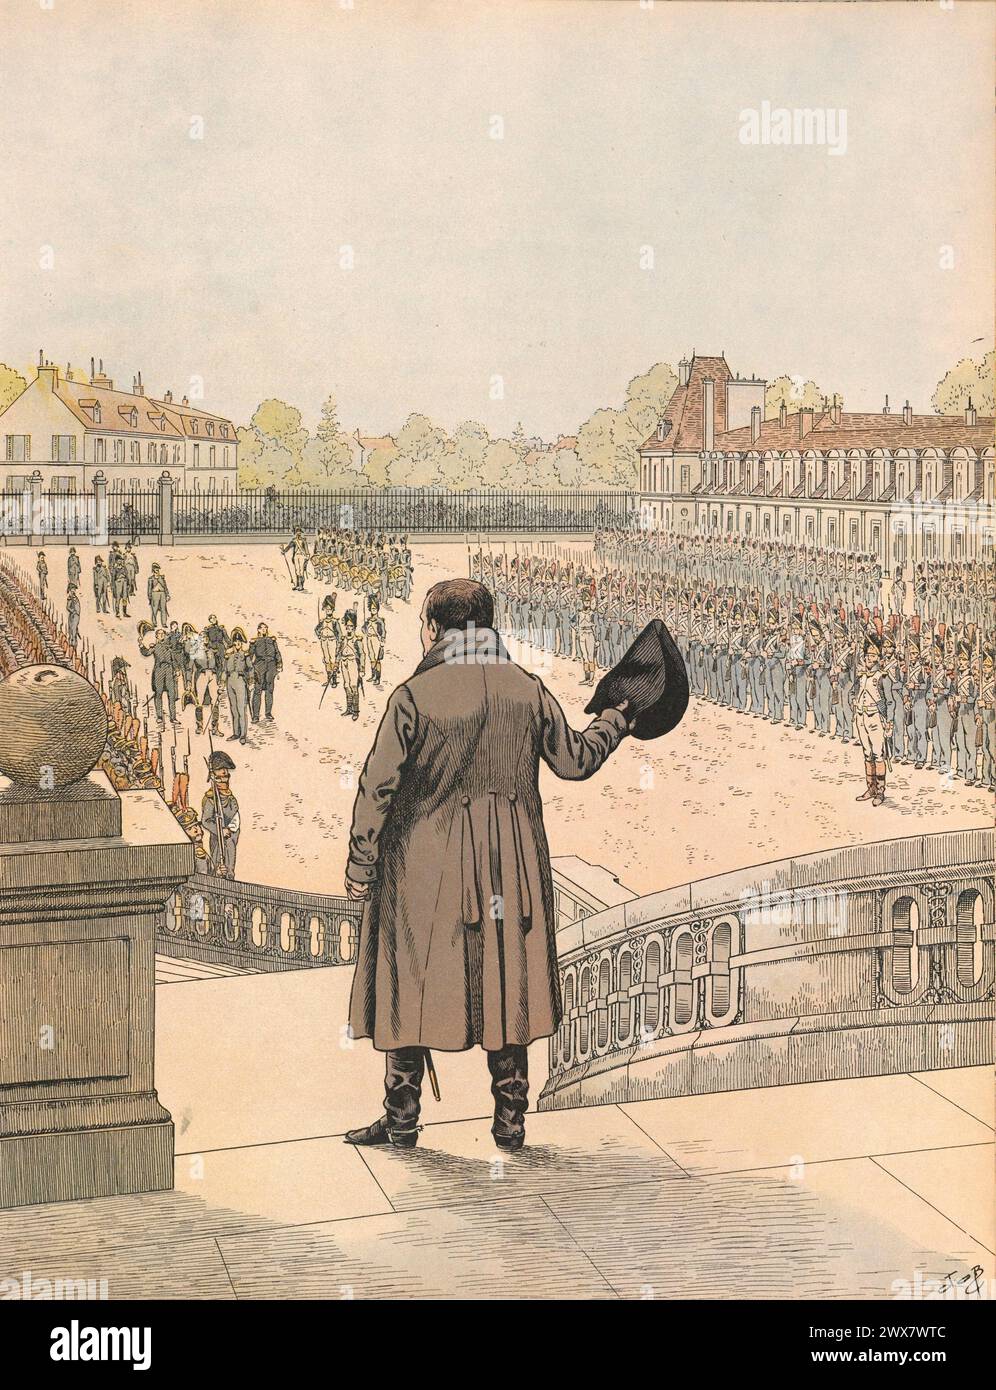 First abdication of Napoleon I after the military failure of the French campaign. 20 April 1814  Illustration by Job from the book 'Napoléon' written by Georges Montorgueil, published in 1921 by Boivin (Paris). Stock Photo